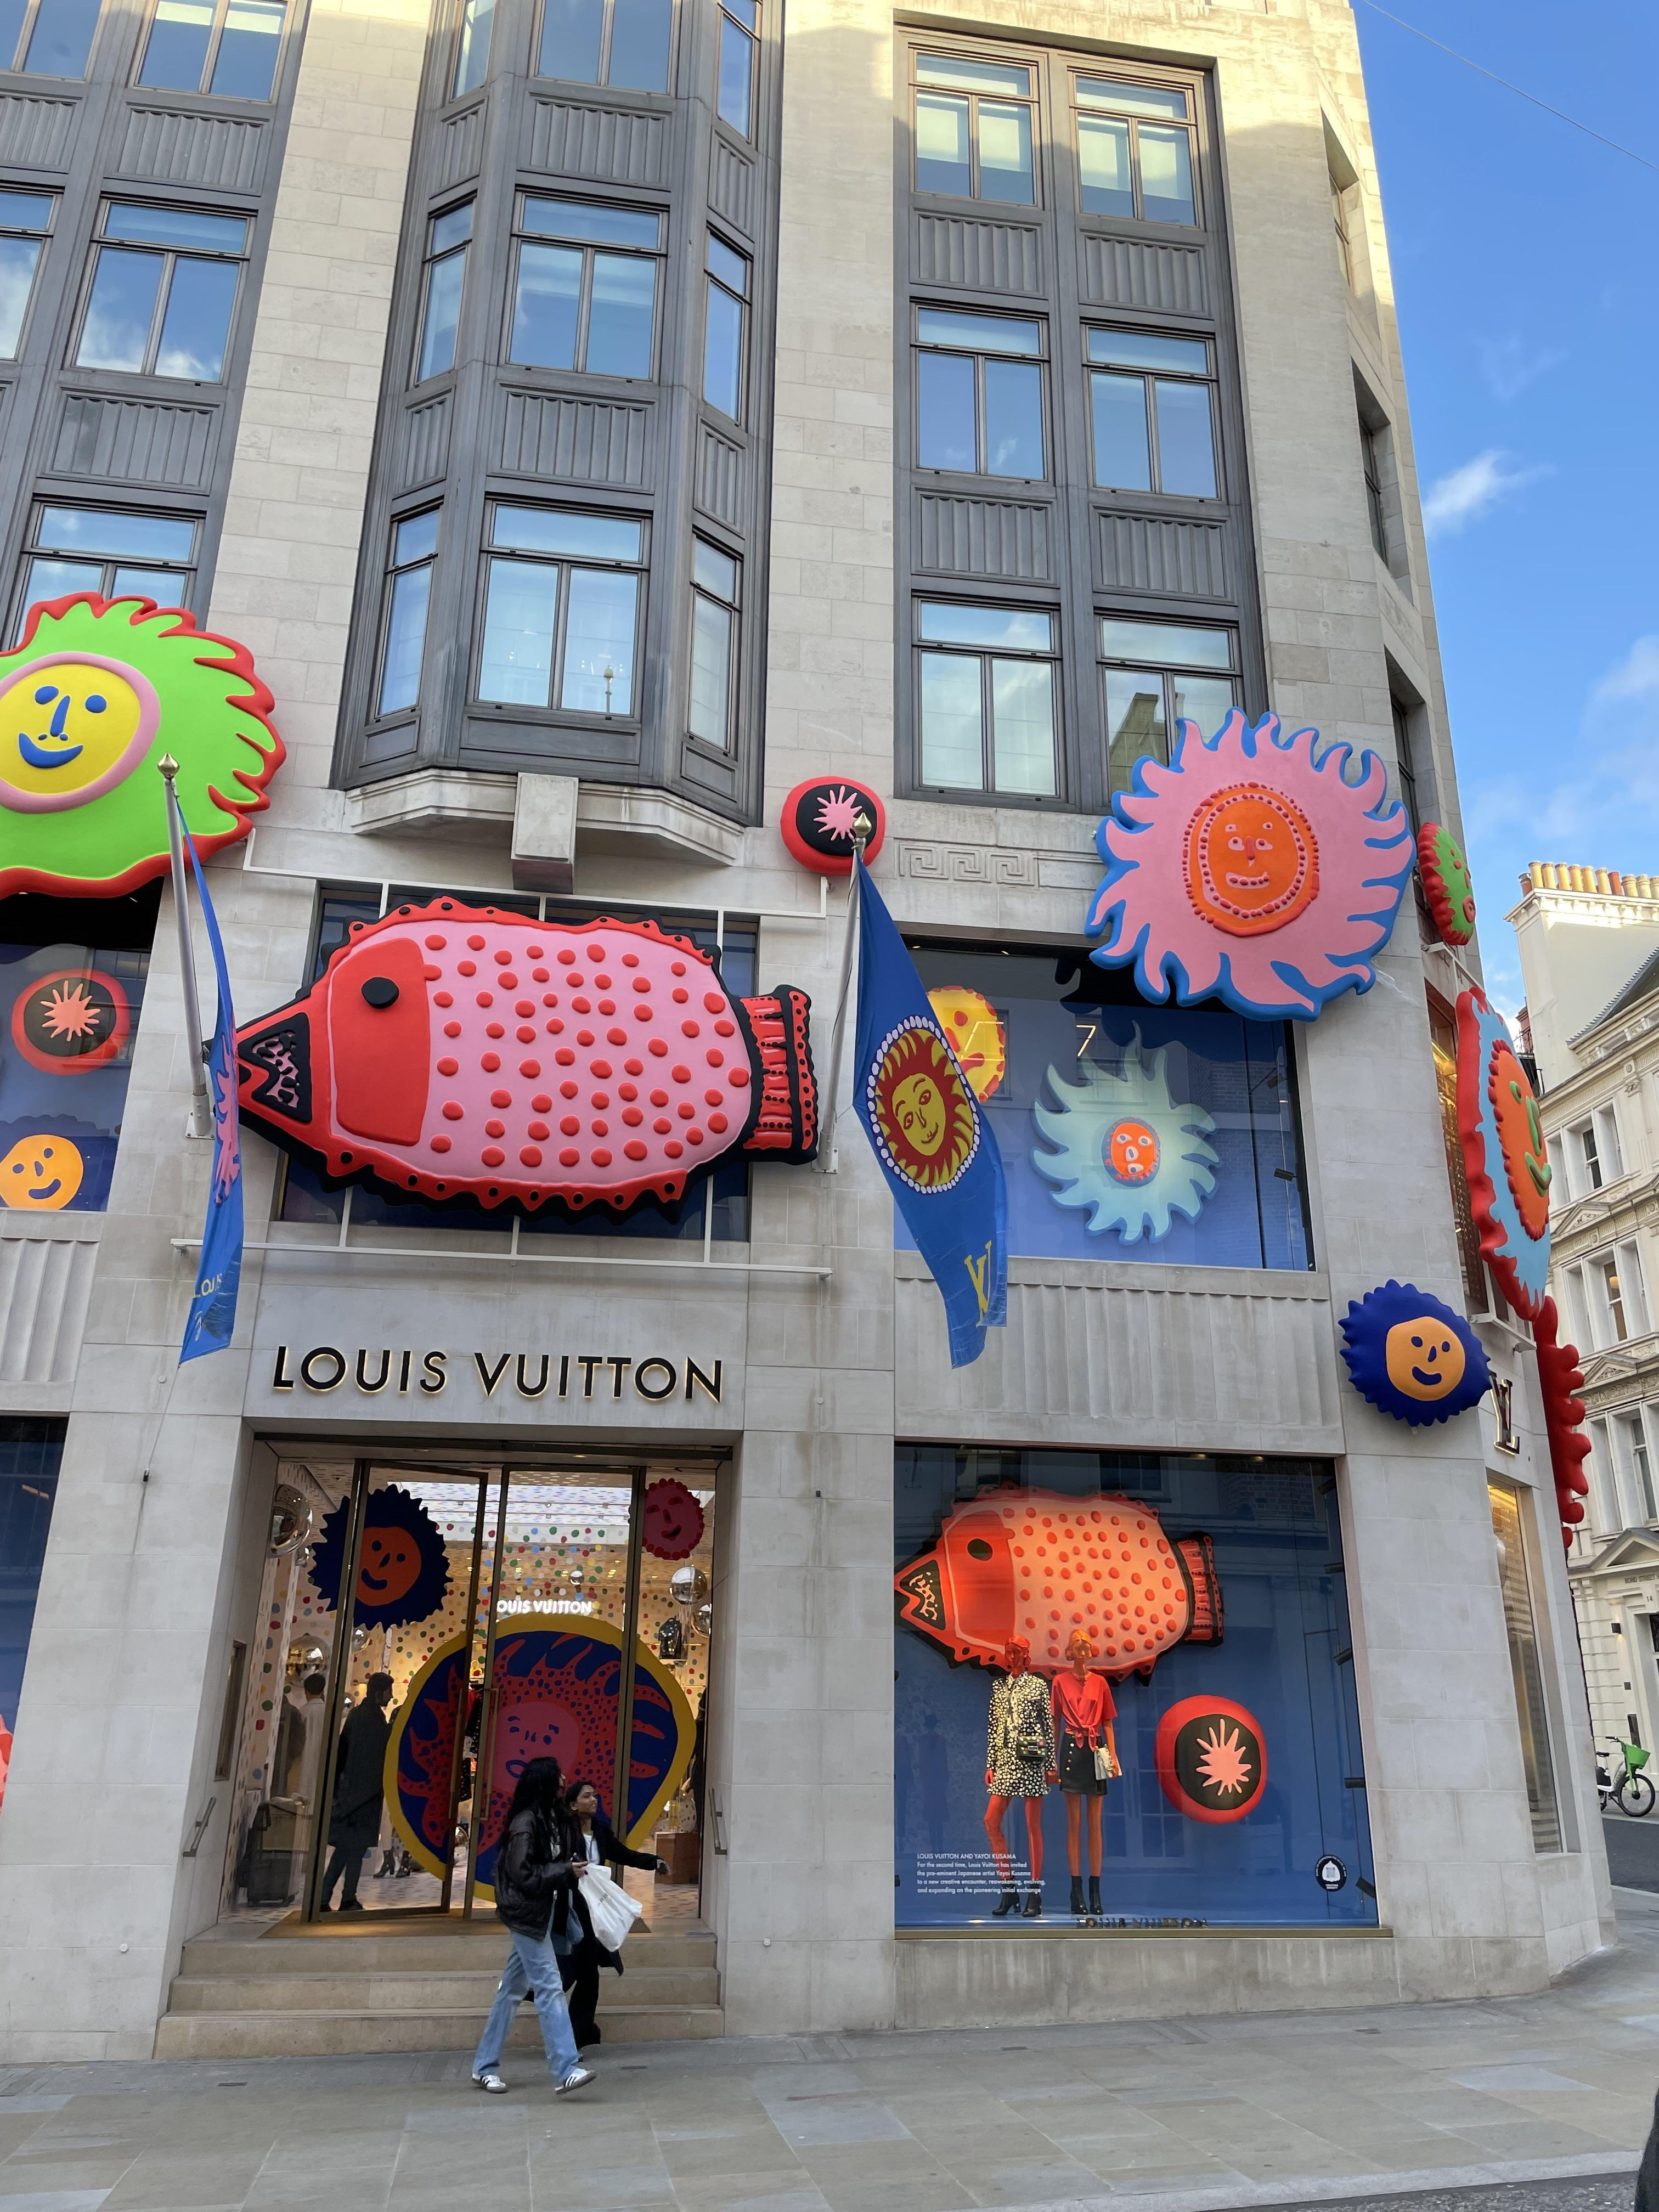 Louis Vuitton The Art of the Journey arrives at Bond Street